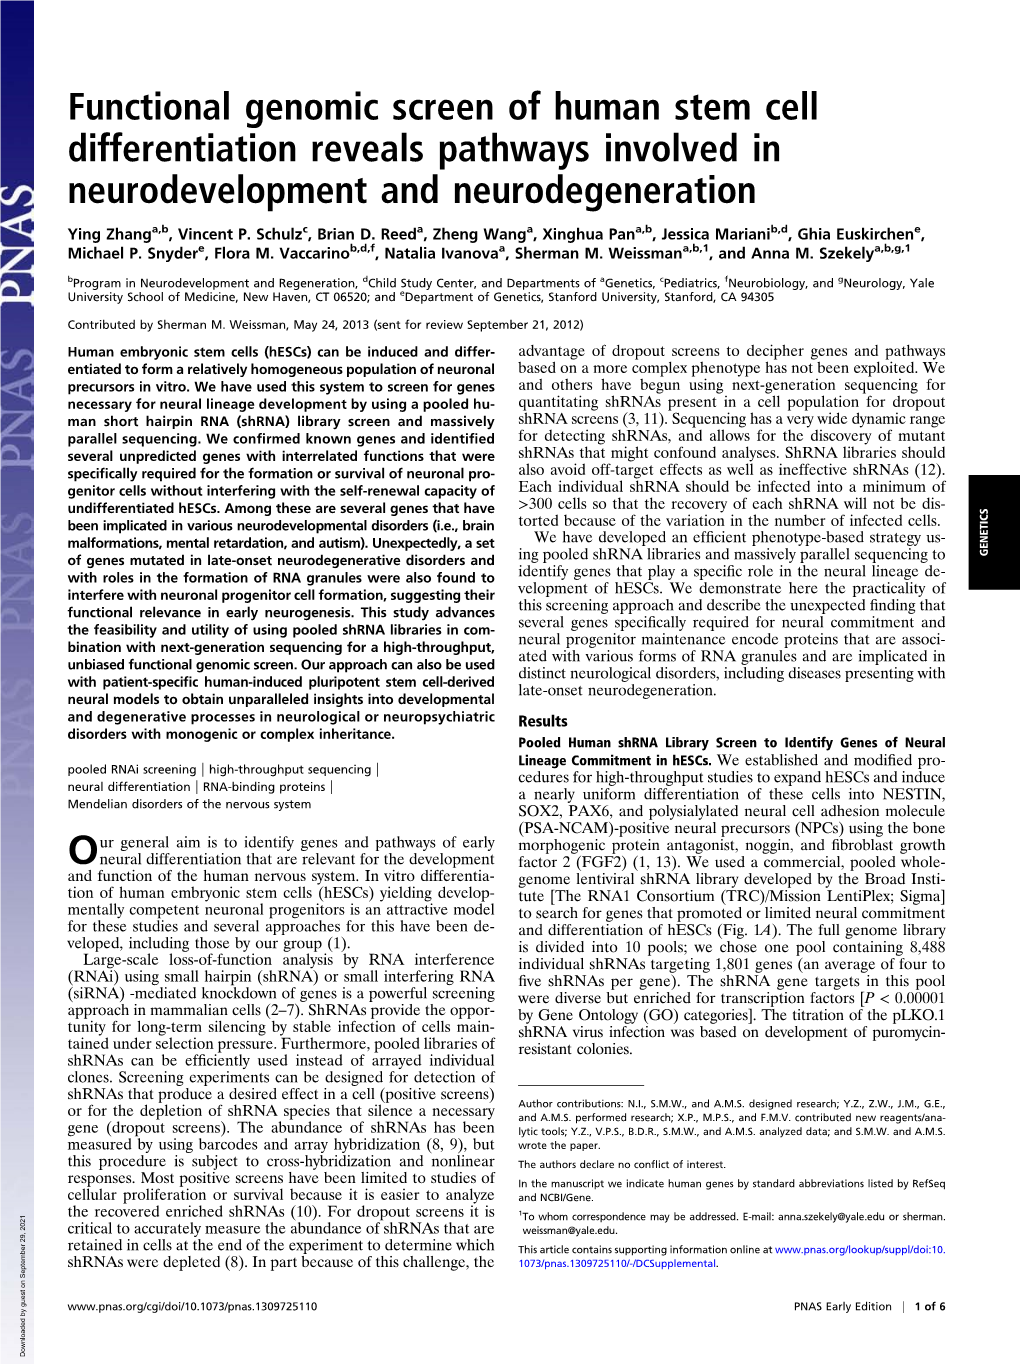 Functional Genomic Screen of Human Stem Cell Differentiation Reveals Pathways Involved in Neurodevelopment and Neurodegeneration